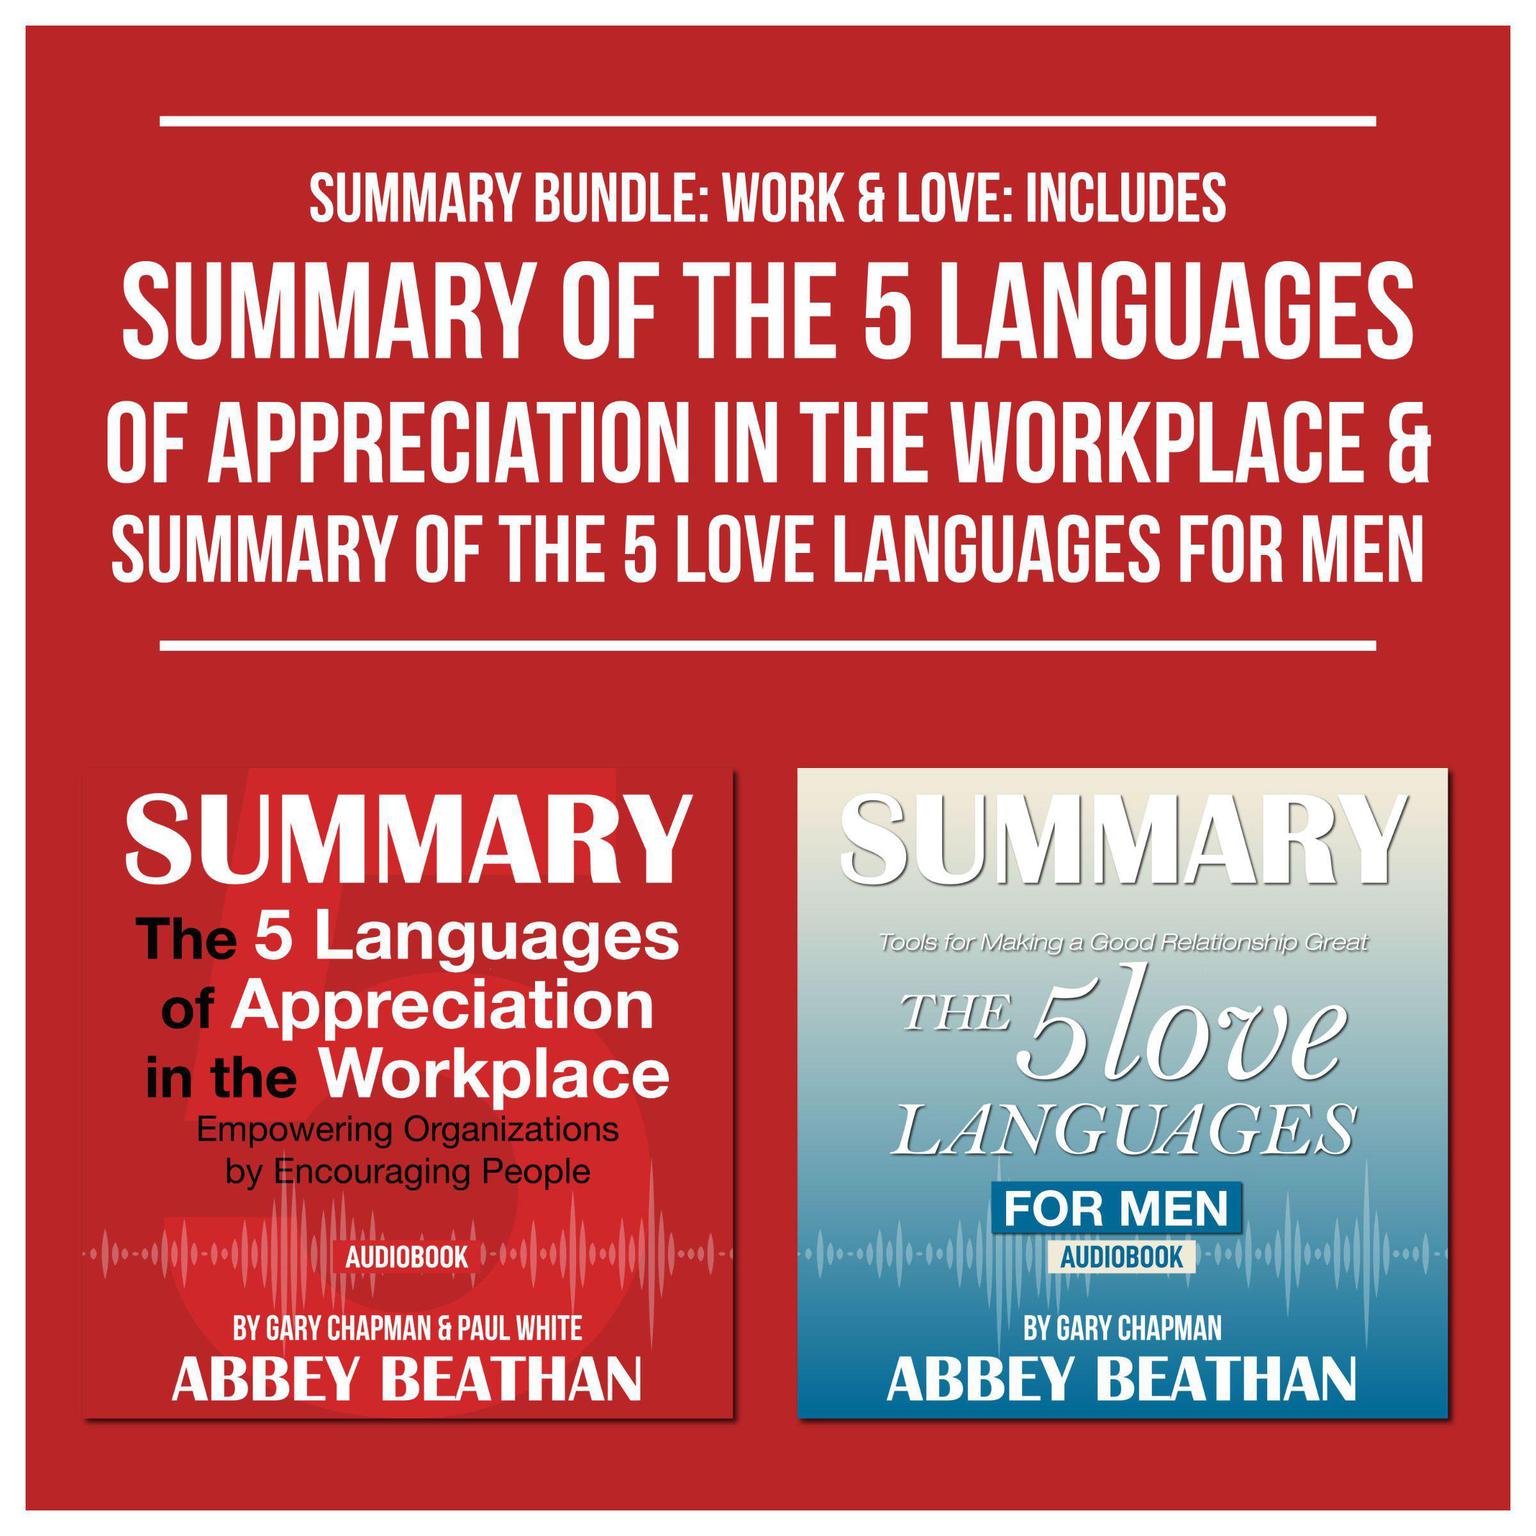 Summary Bundle: Work & Love: Includes Summary of The 5 Languages of Appreciation in the Workplace & Summary of The 5 Love Languages for Men Audiobook, by Abbey Beathan